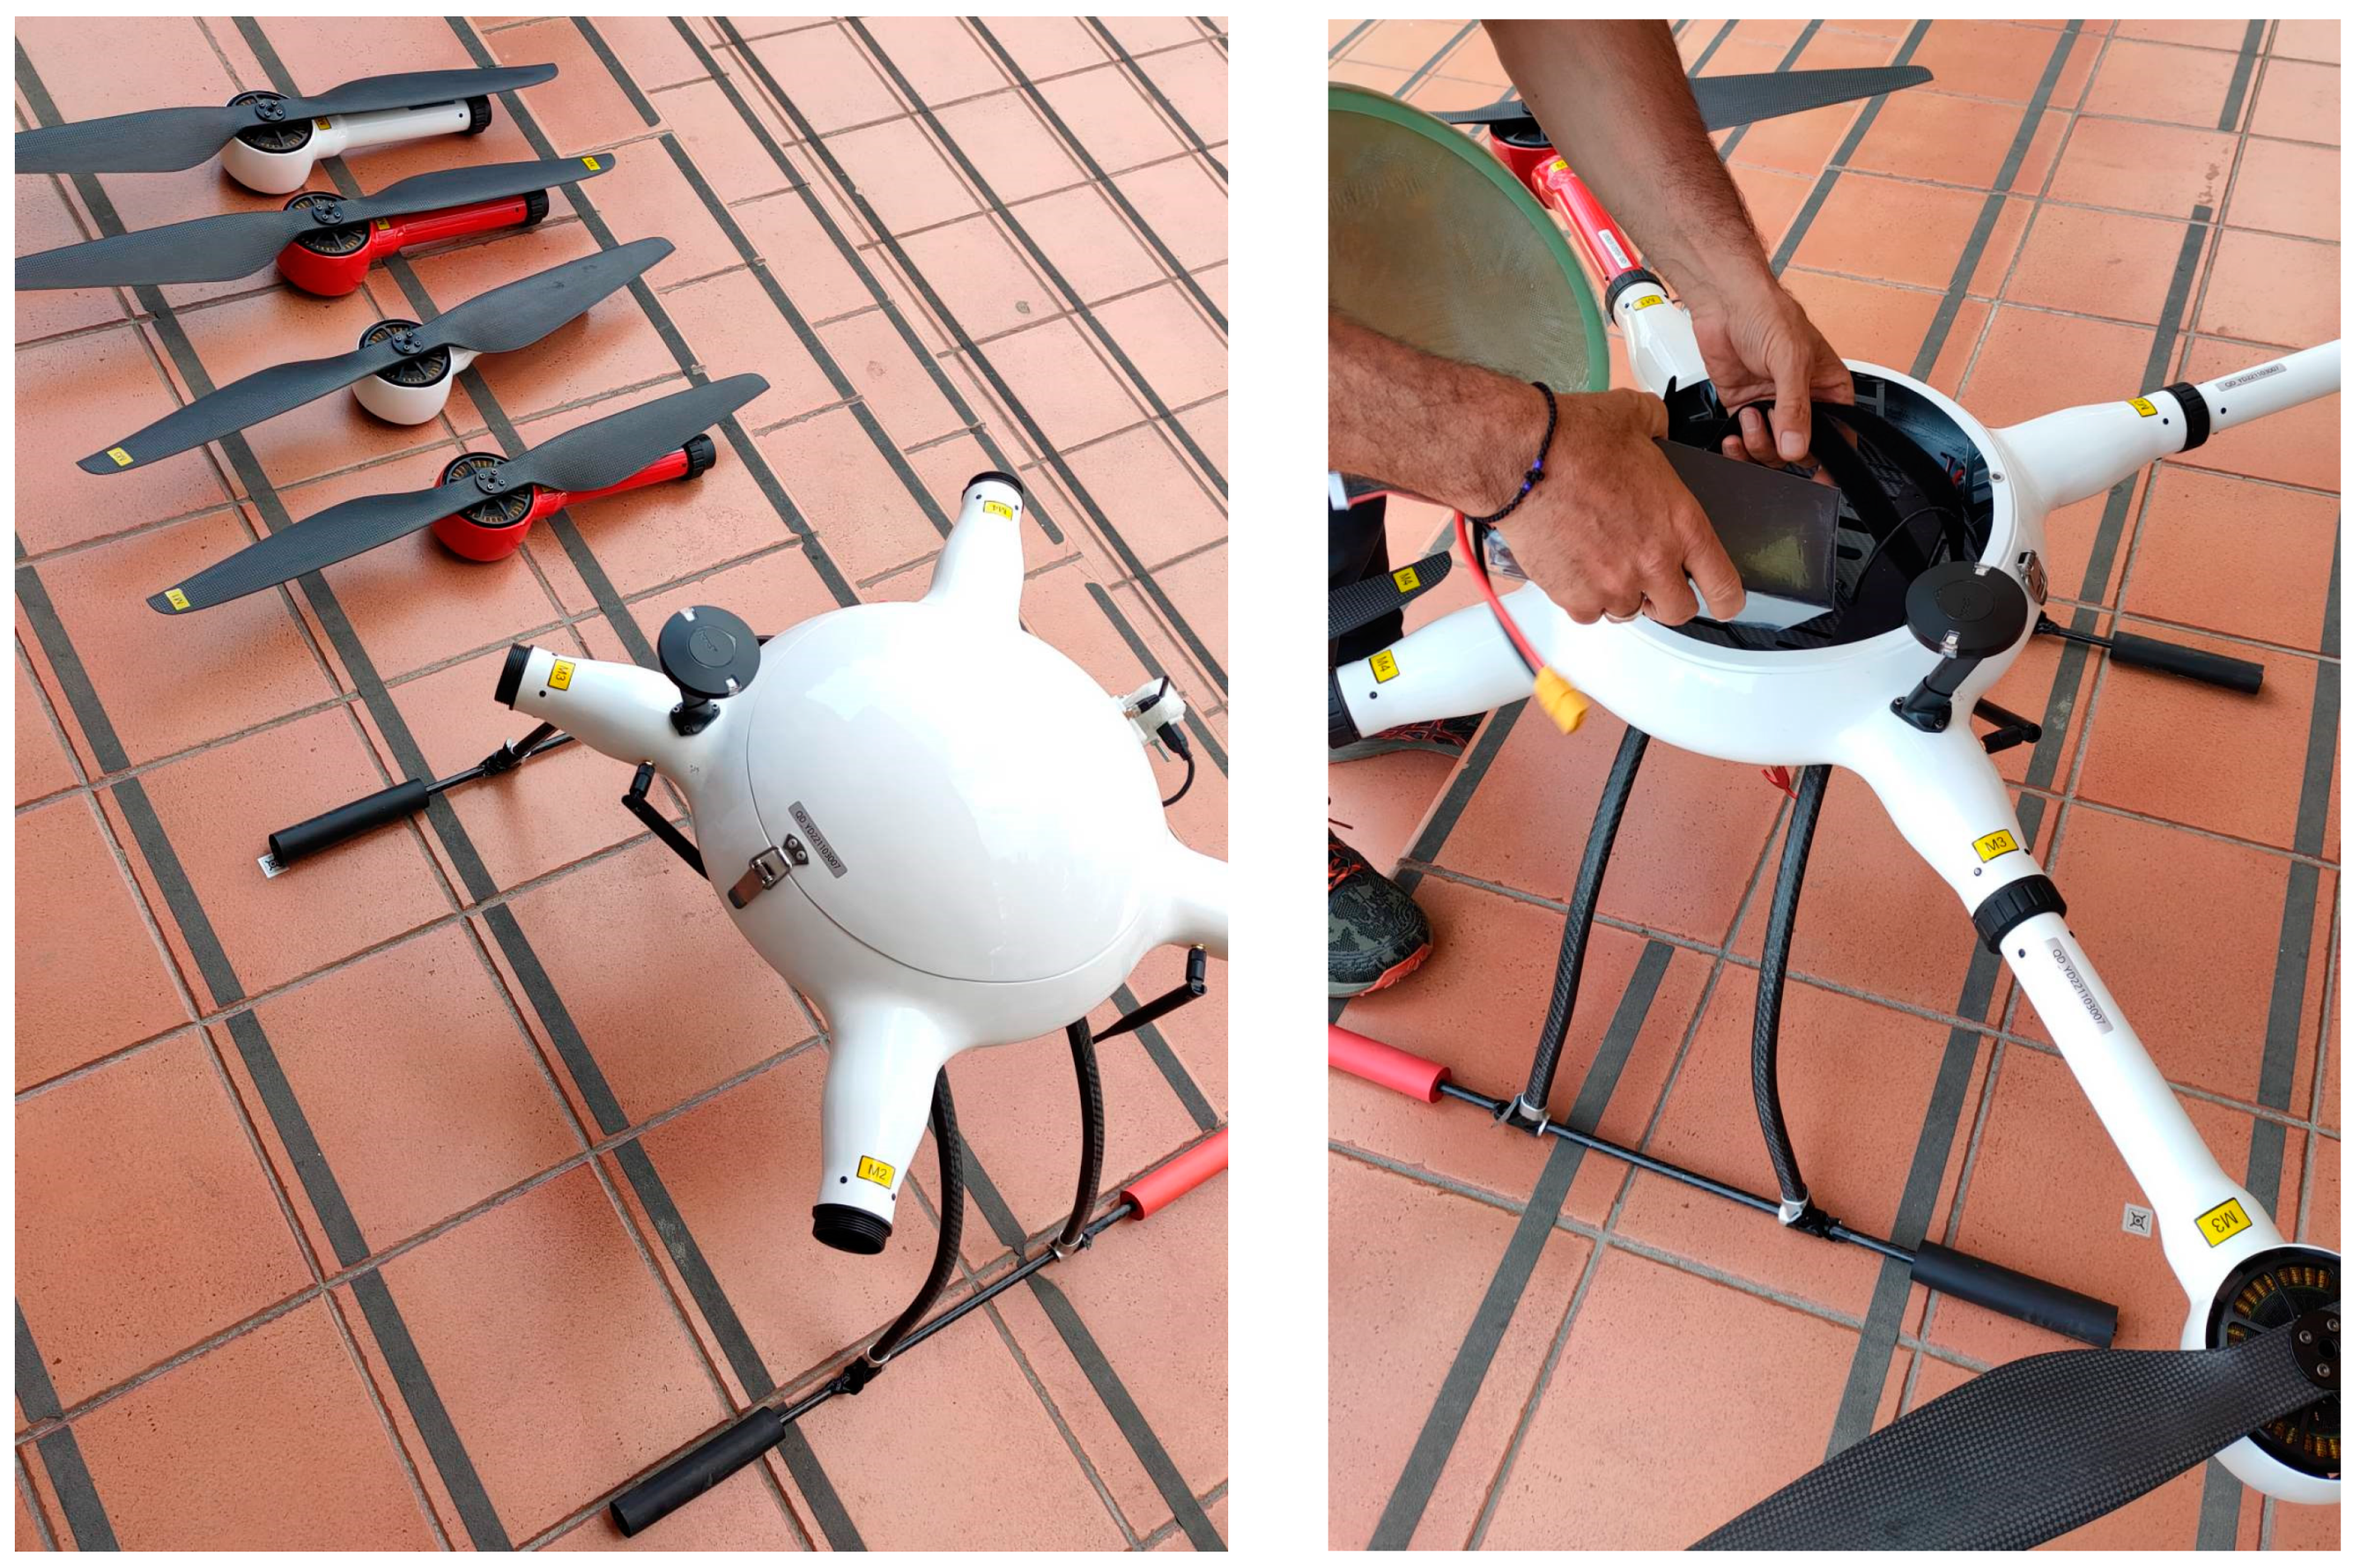 Drones | Free Full-Text | Paving the Way for Last-Mile Delivery in Greece:  Data-Driven Performance Analysis with a Customized Quadrotor